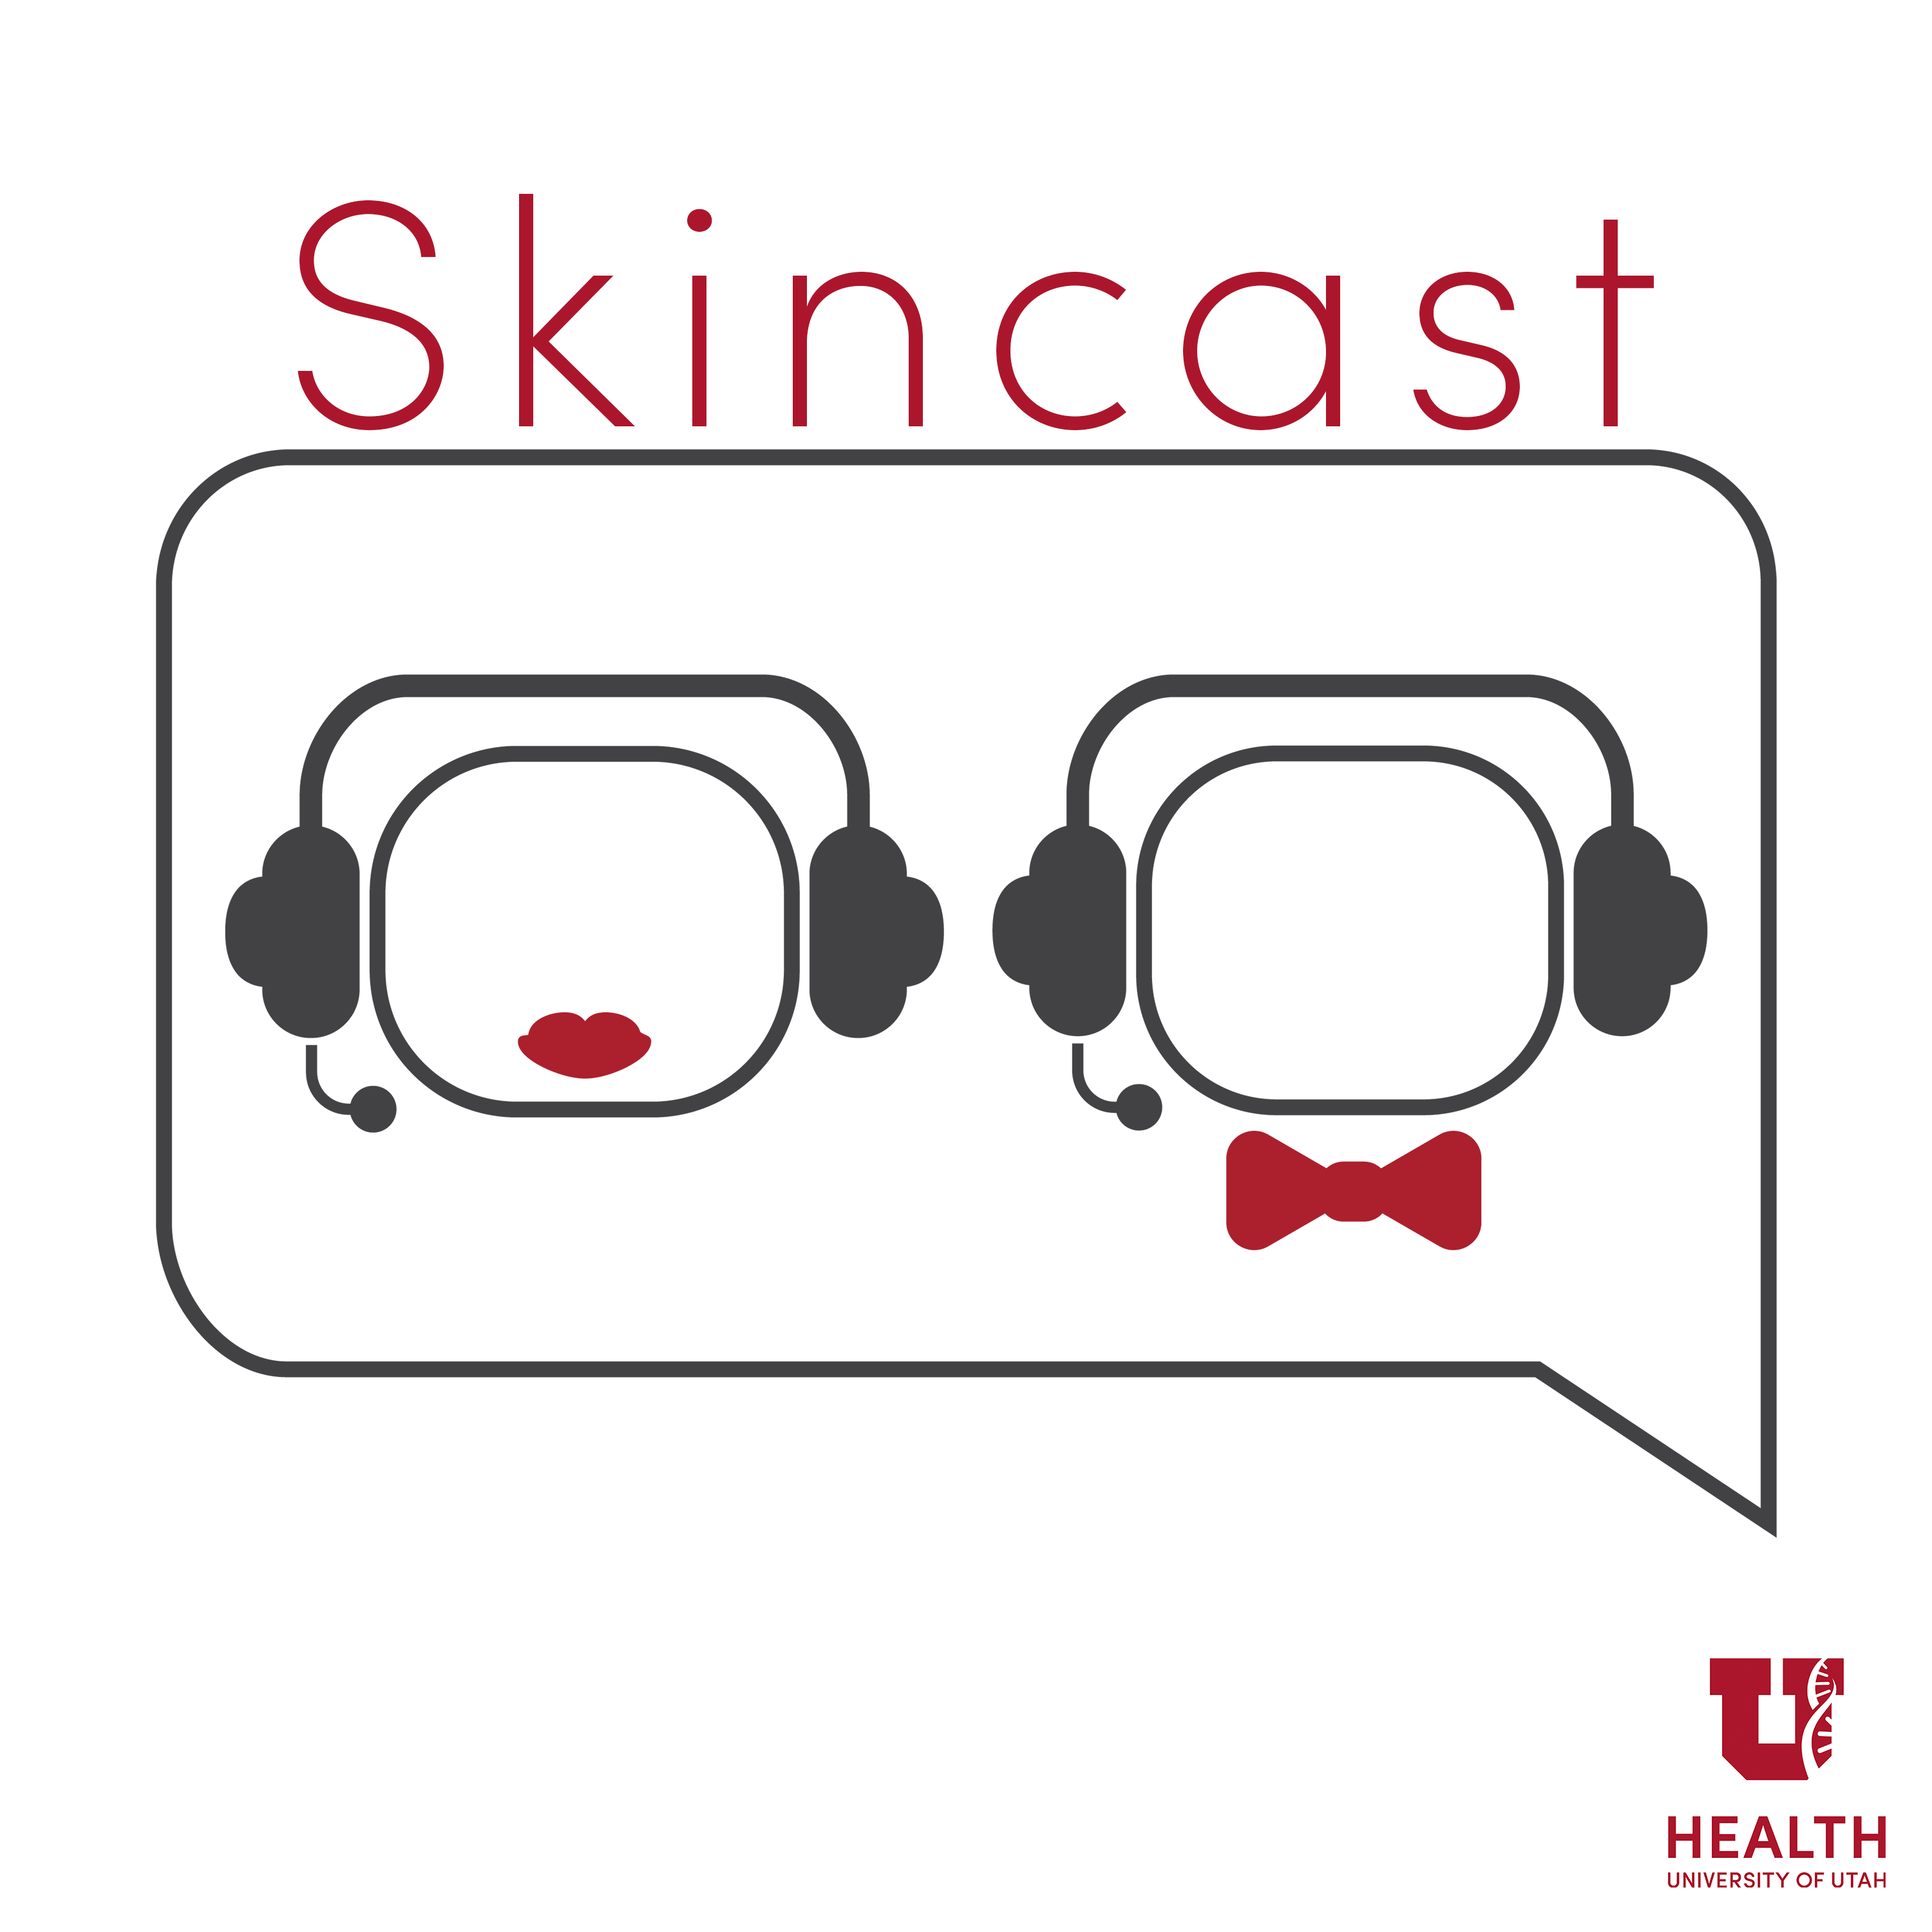 Ep. 17: Improving the Skin's Appearance With Expert Cosmetic Procedures 